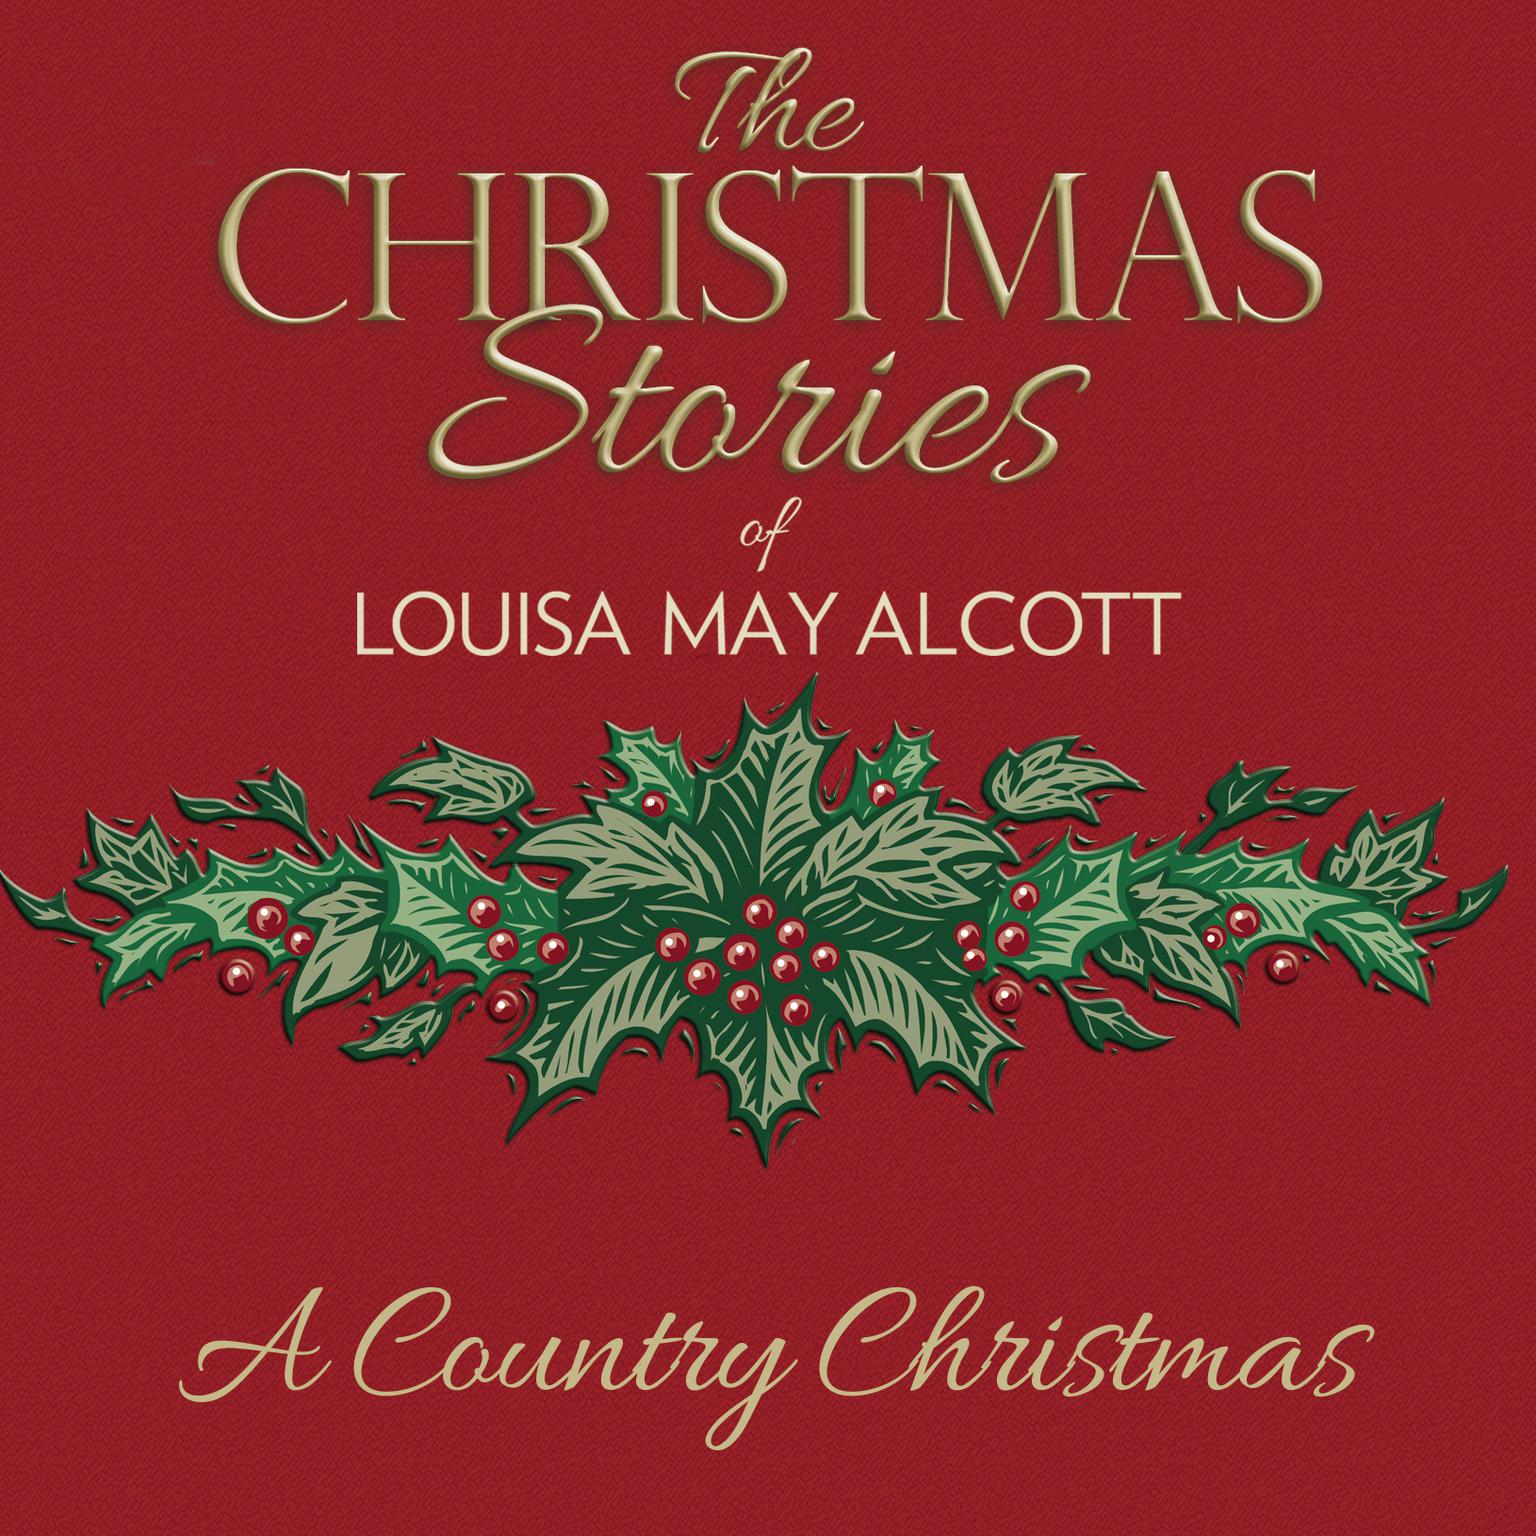 A Country Christmas Audiobook, by Louisa May Alcott